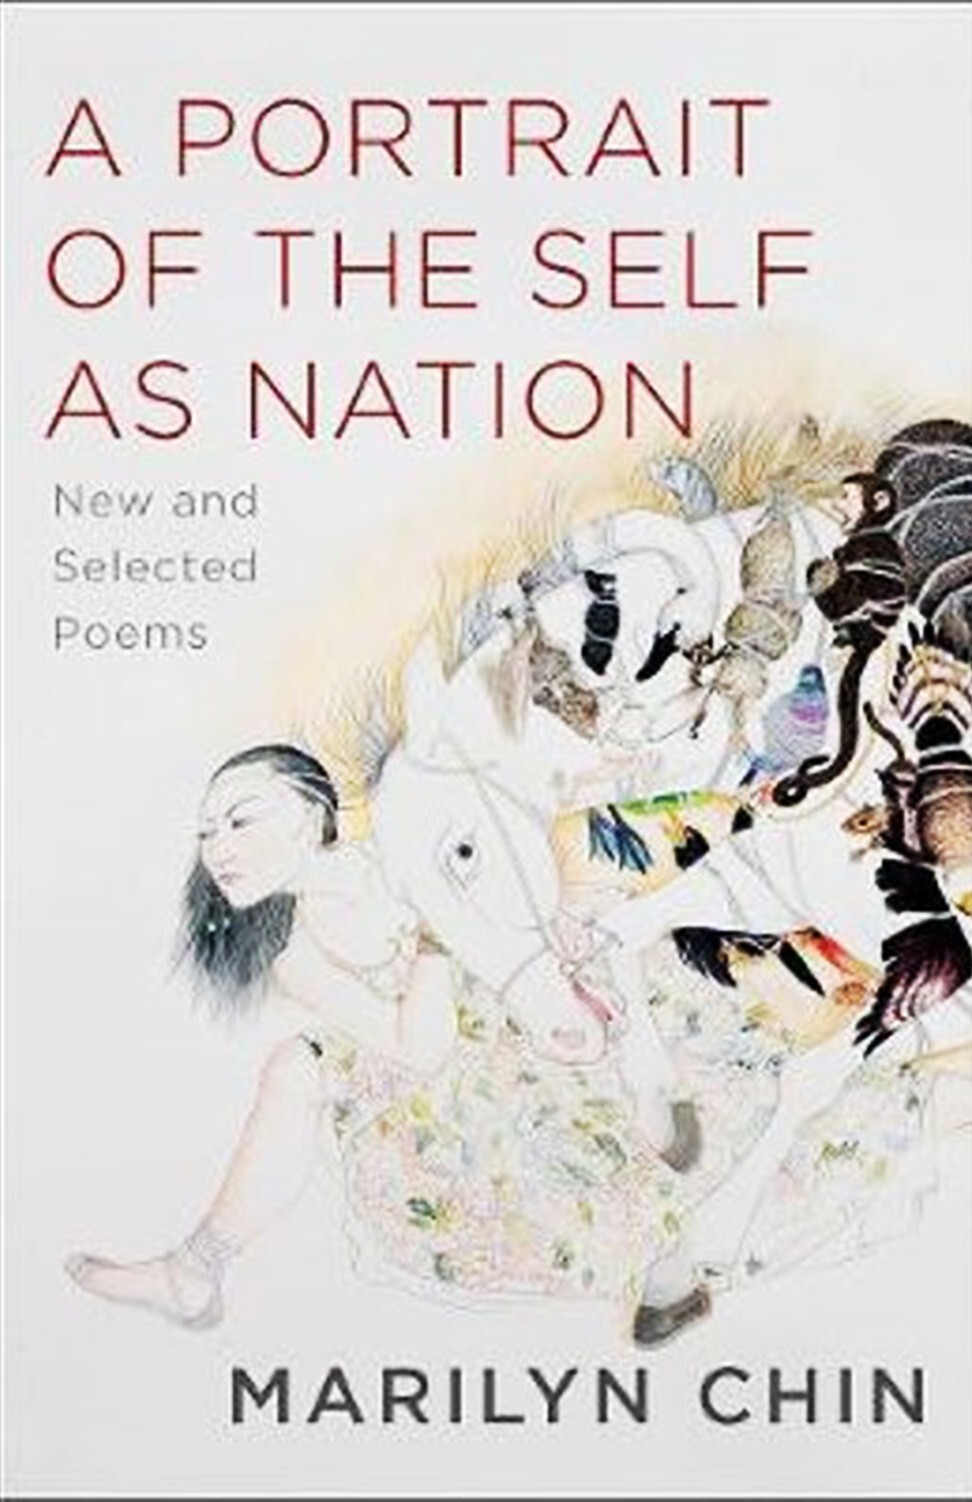 A Portrait of the Self as Nation, by Marilyn Chin. Photo: Handout